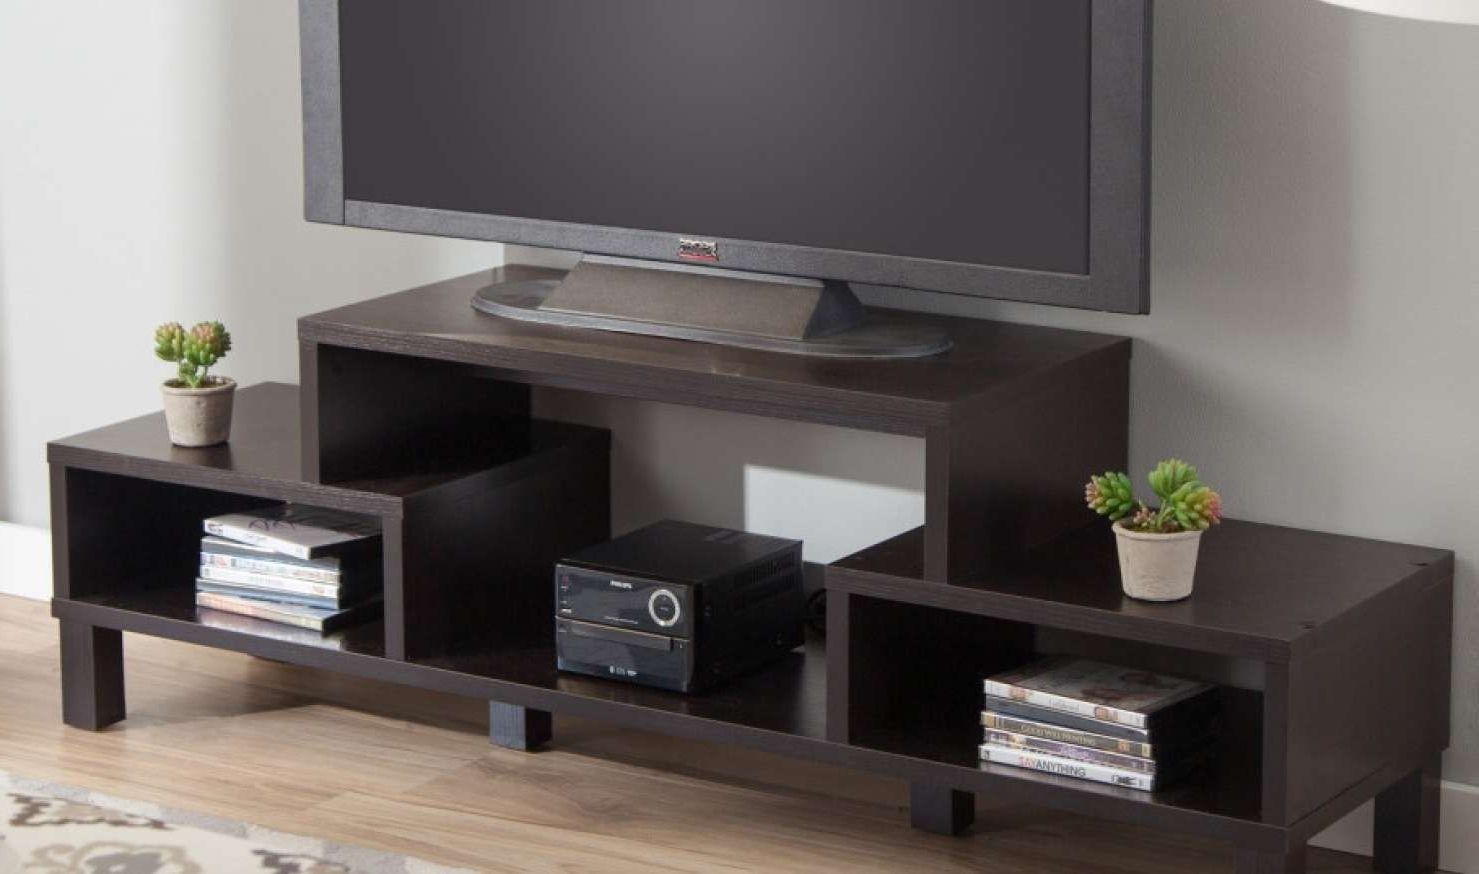 Well Liked Hunting For The Good Trendy Tv Stands? So This Is Really Proper Throughout Contemporary Glass Tv Stands (View 11 of 20)